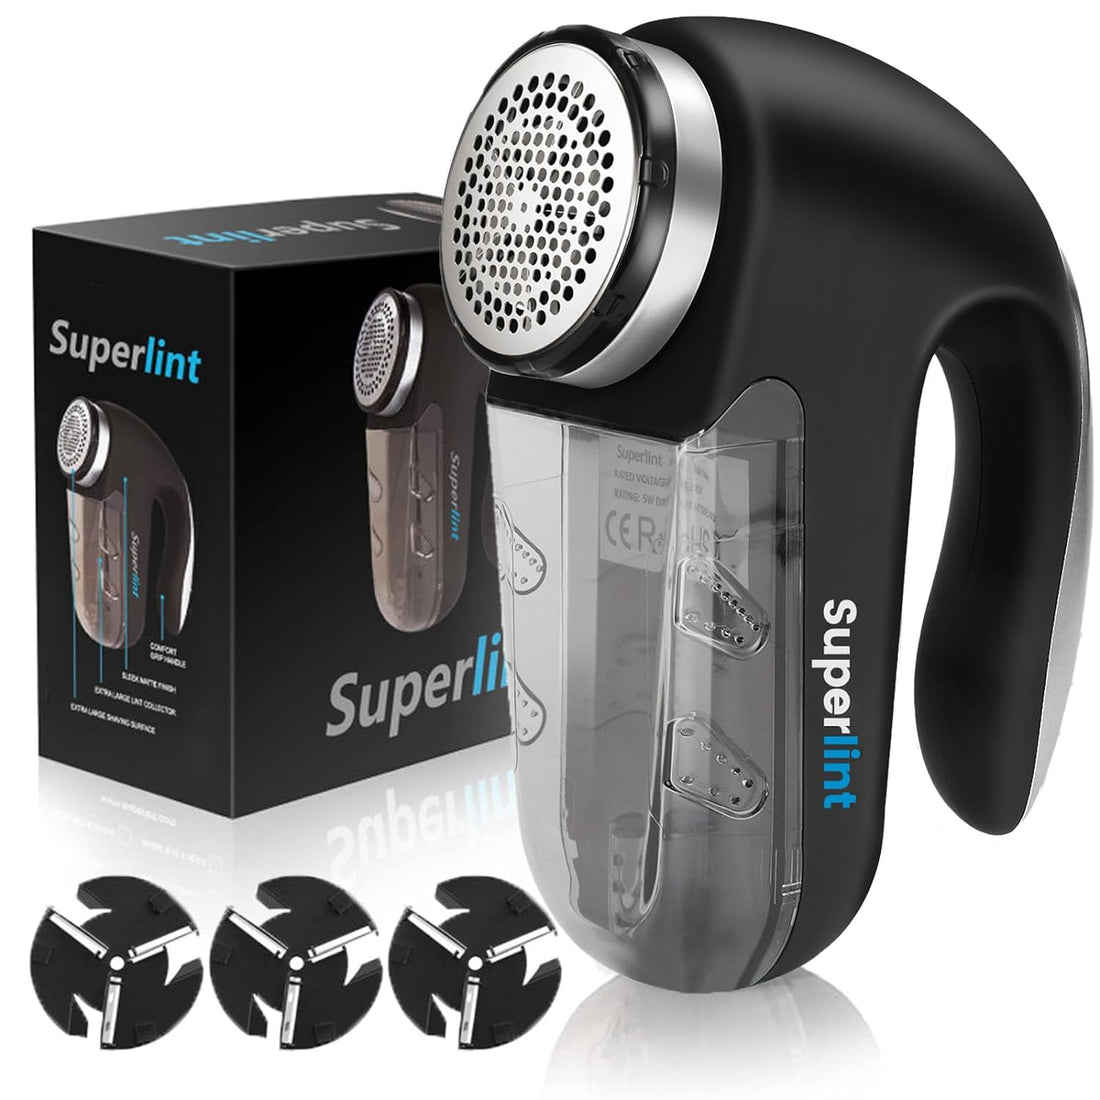 SUPER LINT Professional Electric Sweater Shaver Best Fuzz Pill Bobble Remover for Fabrics, Bedding, Clothes and Furniture, Use with Batteries or Power Adapter, Black & Silver